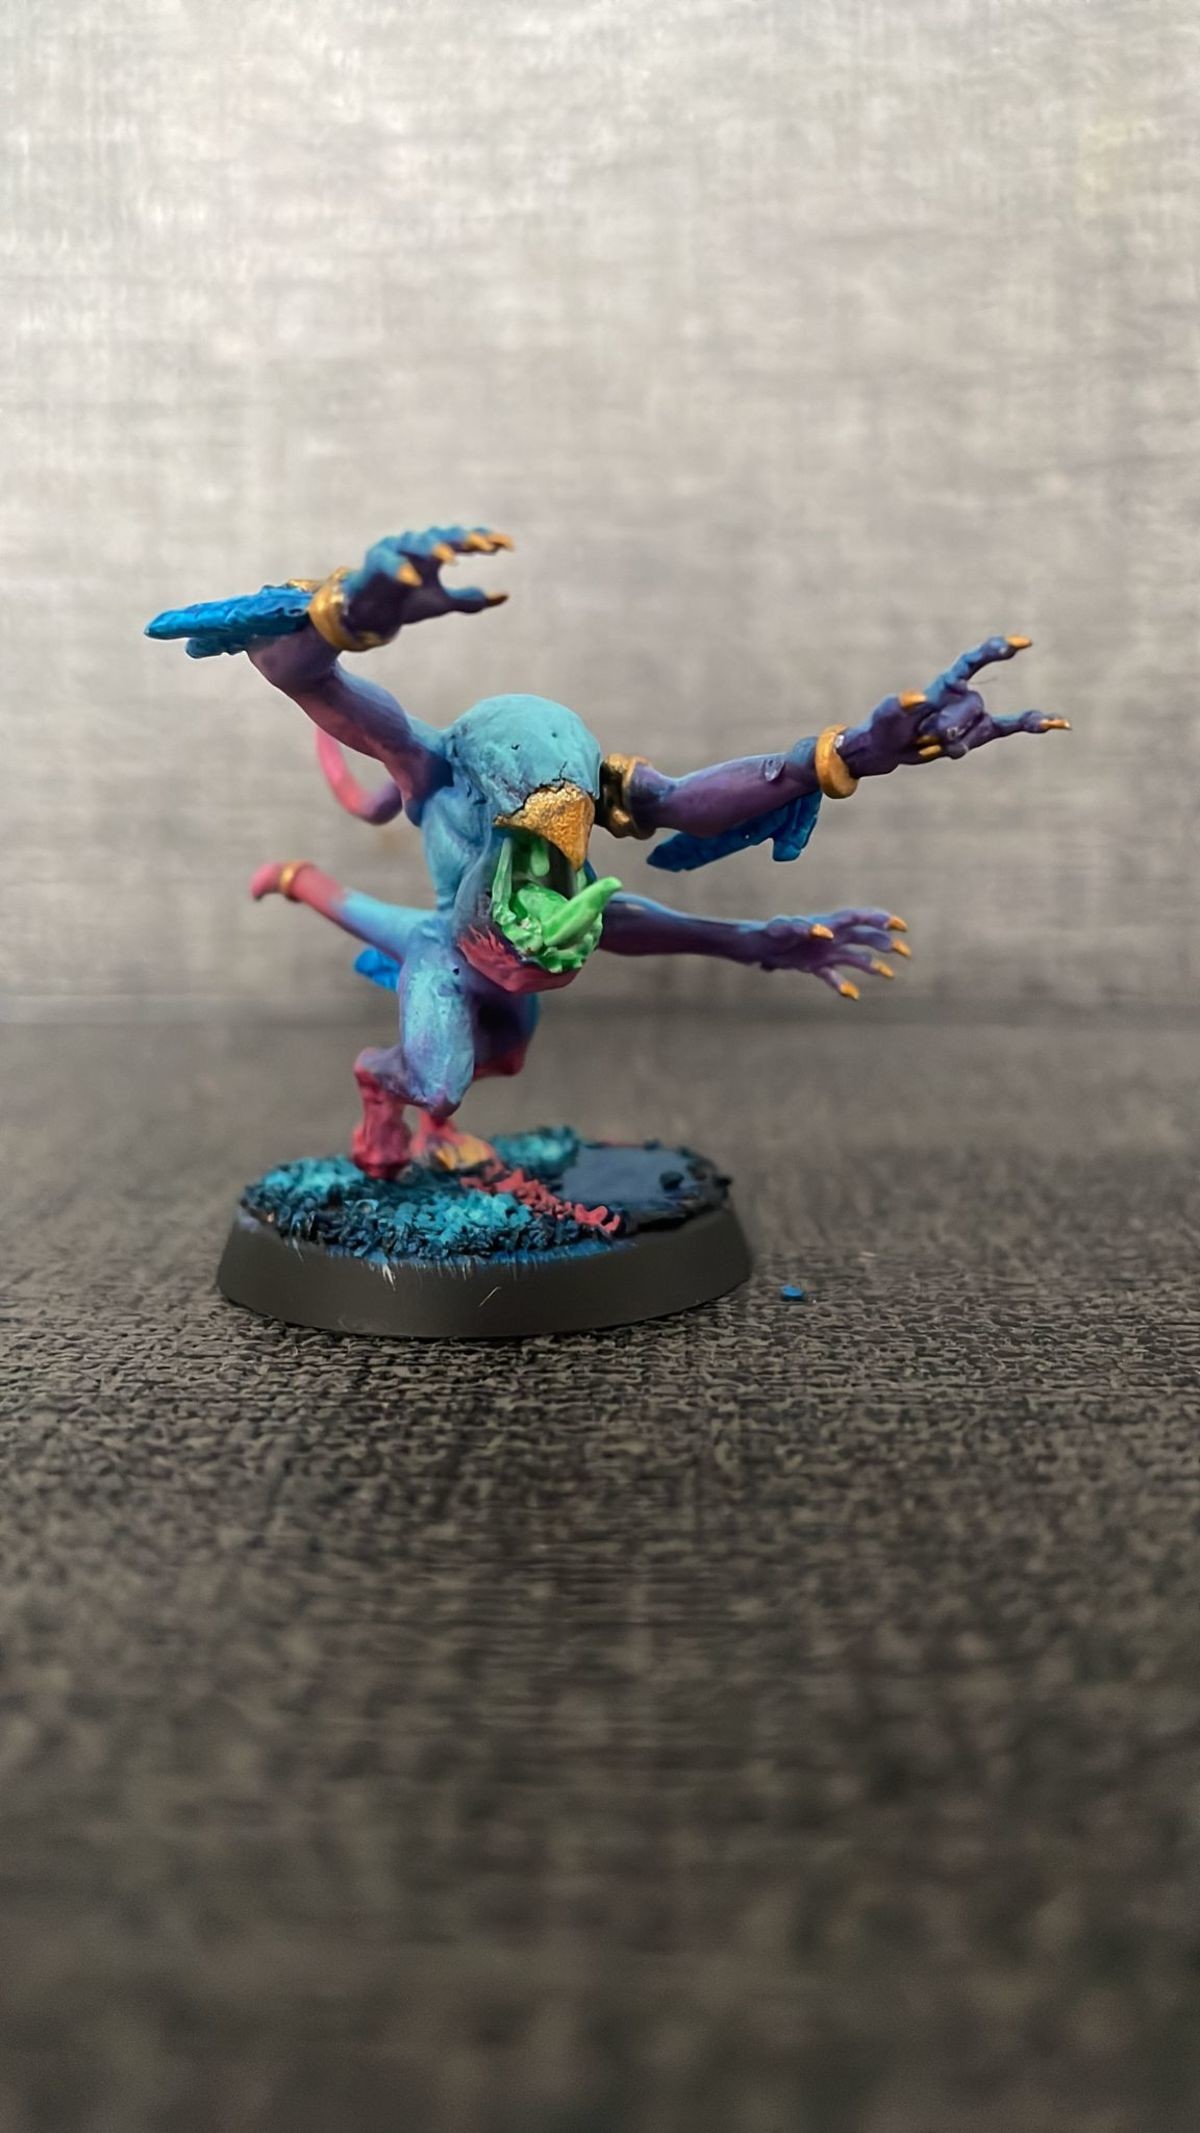 What you guys think of a new color scheme I'm thinking of. After trying alot of pretty radical schemes I think I may just resort to a very tzeentch looking them